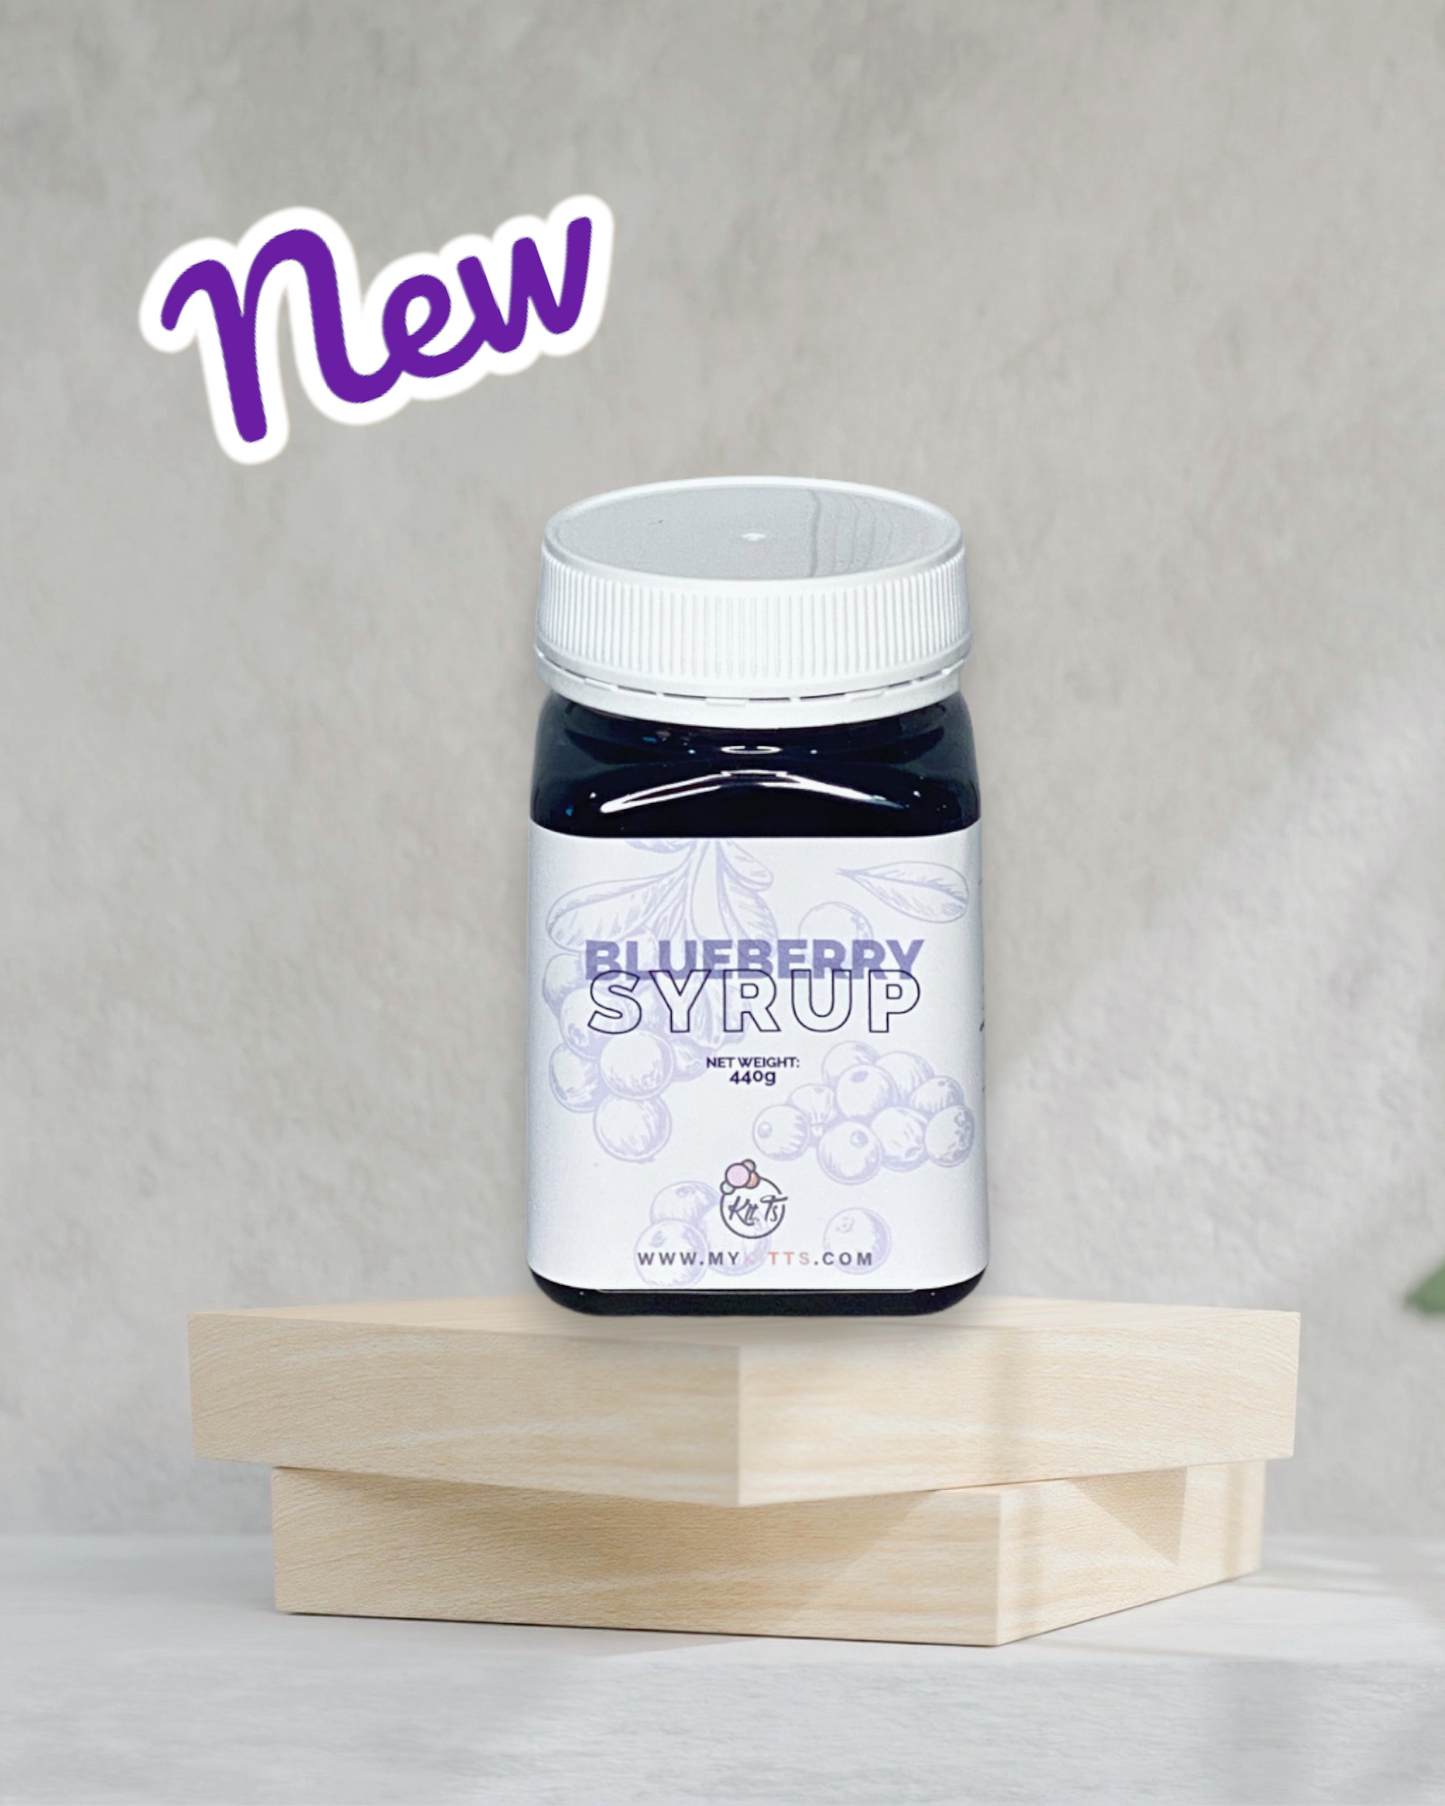 Blueberry Syrup 440g